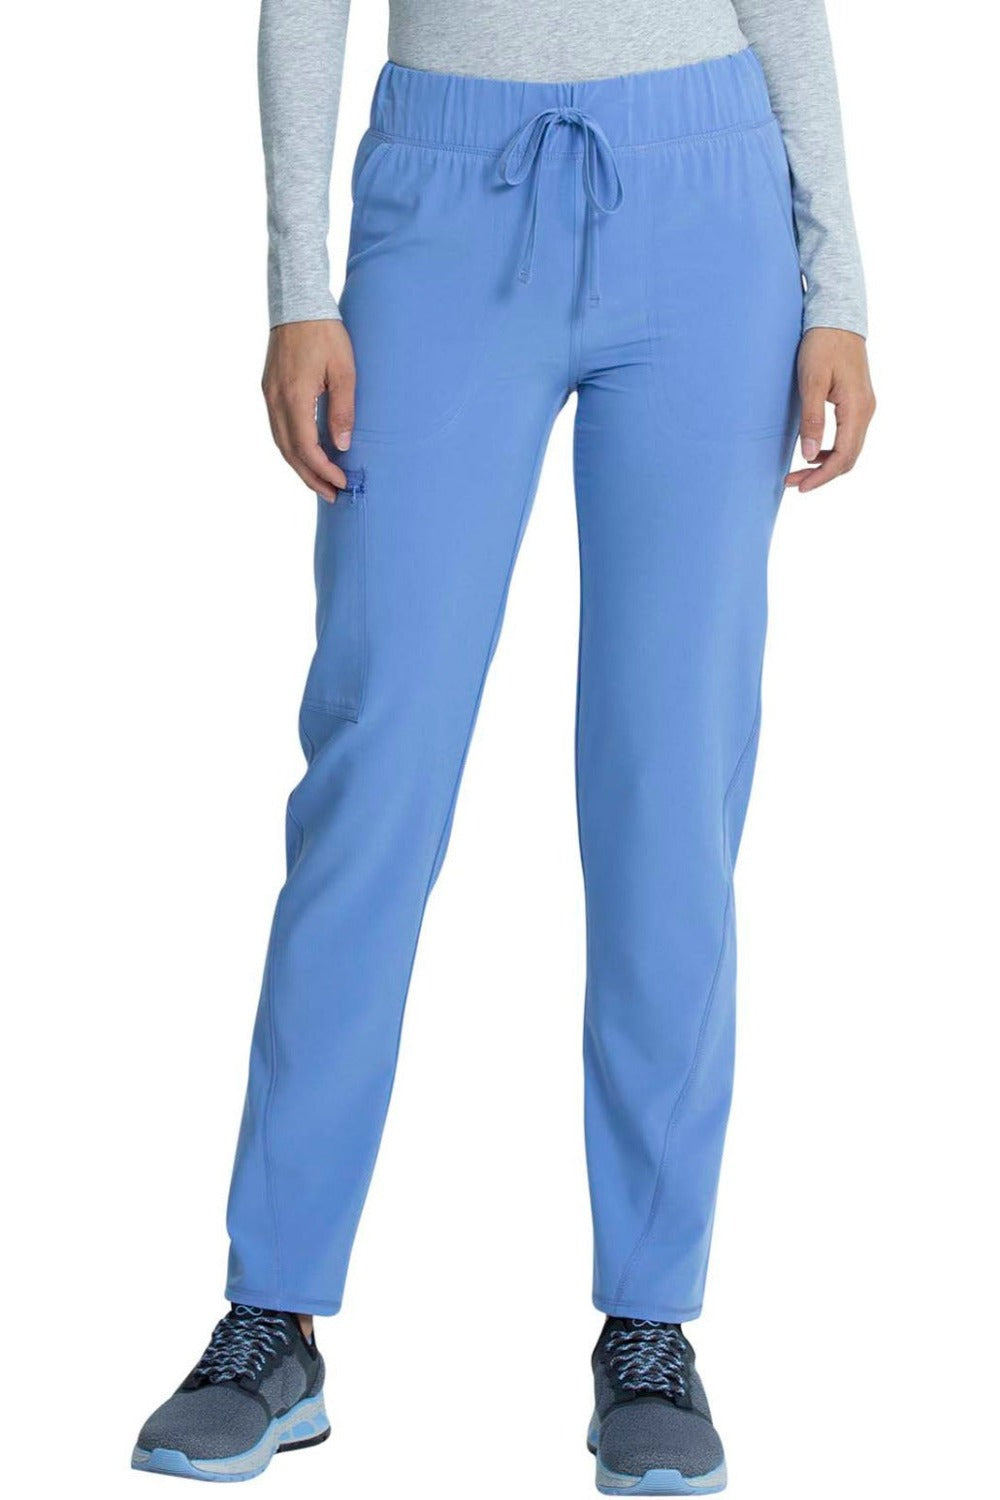 Cherokee Allura Scrub Pant Mid Rise Tapered Leg Drawstring in Ciel at Parker's Clothing and Shoes.